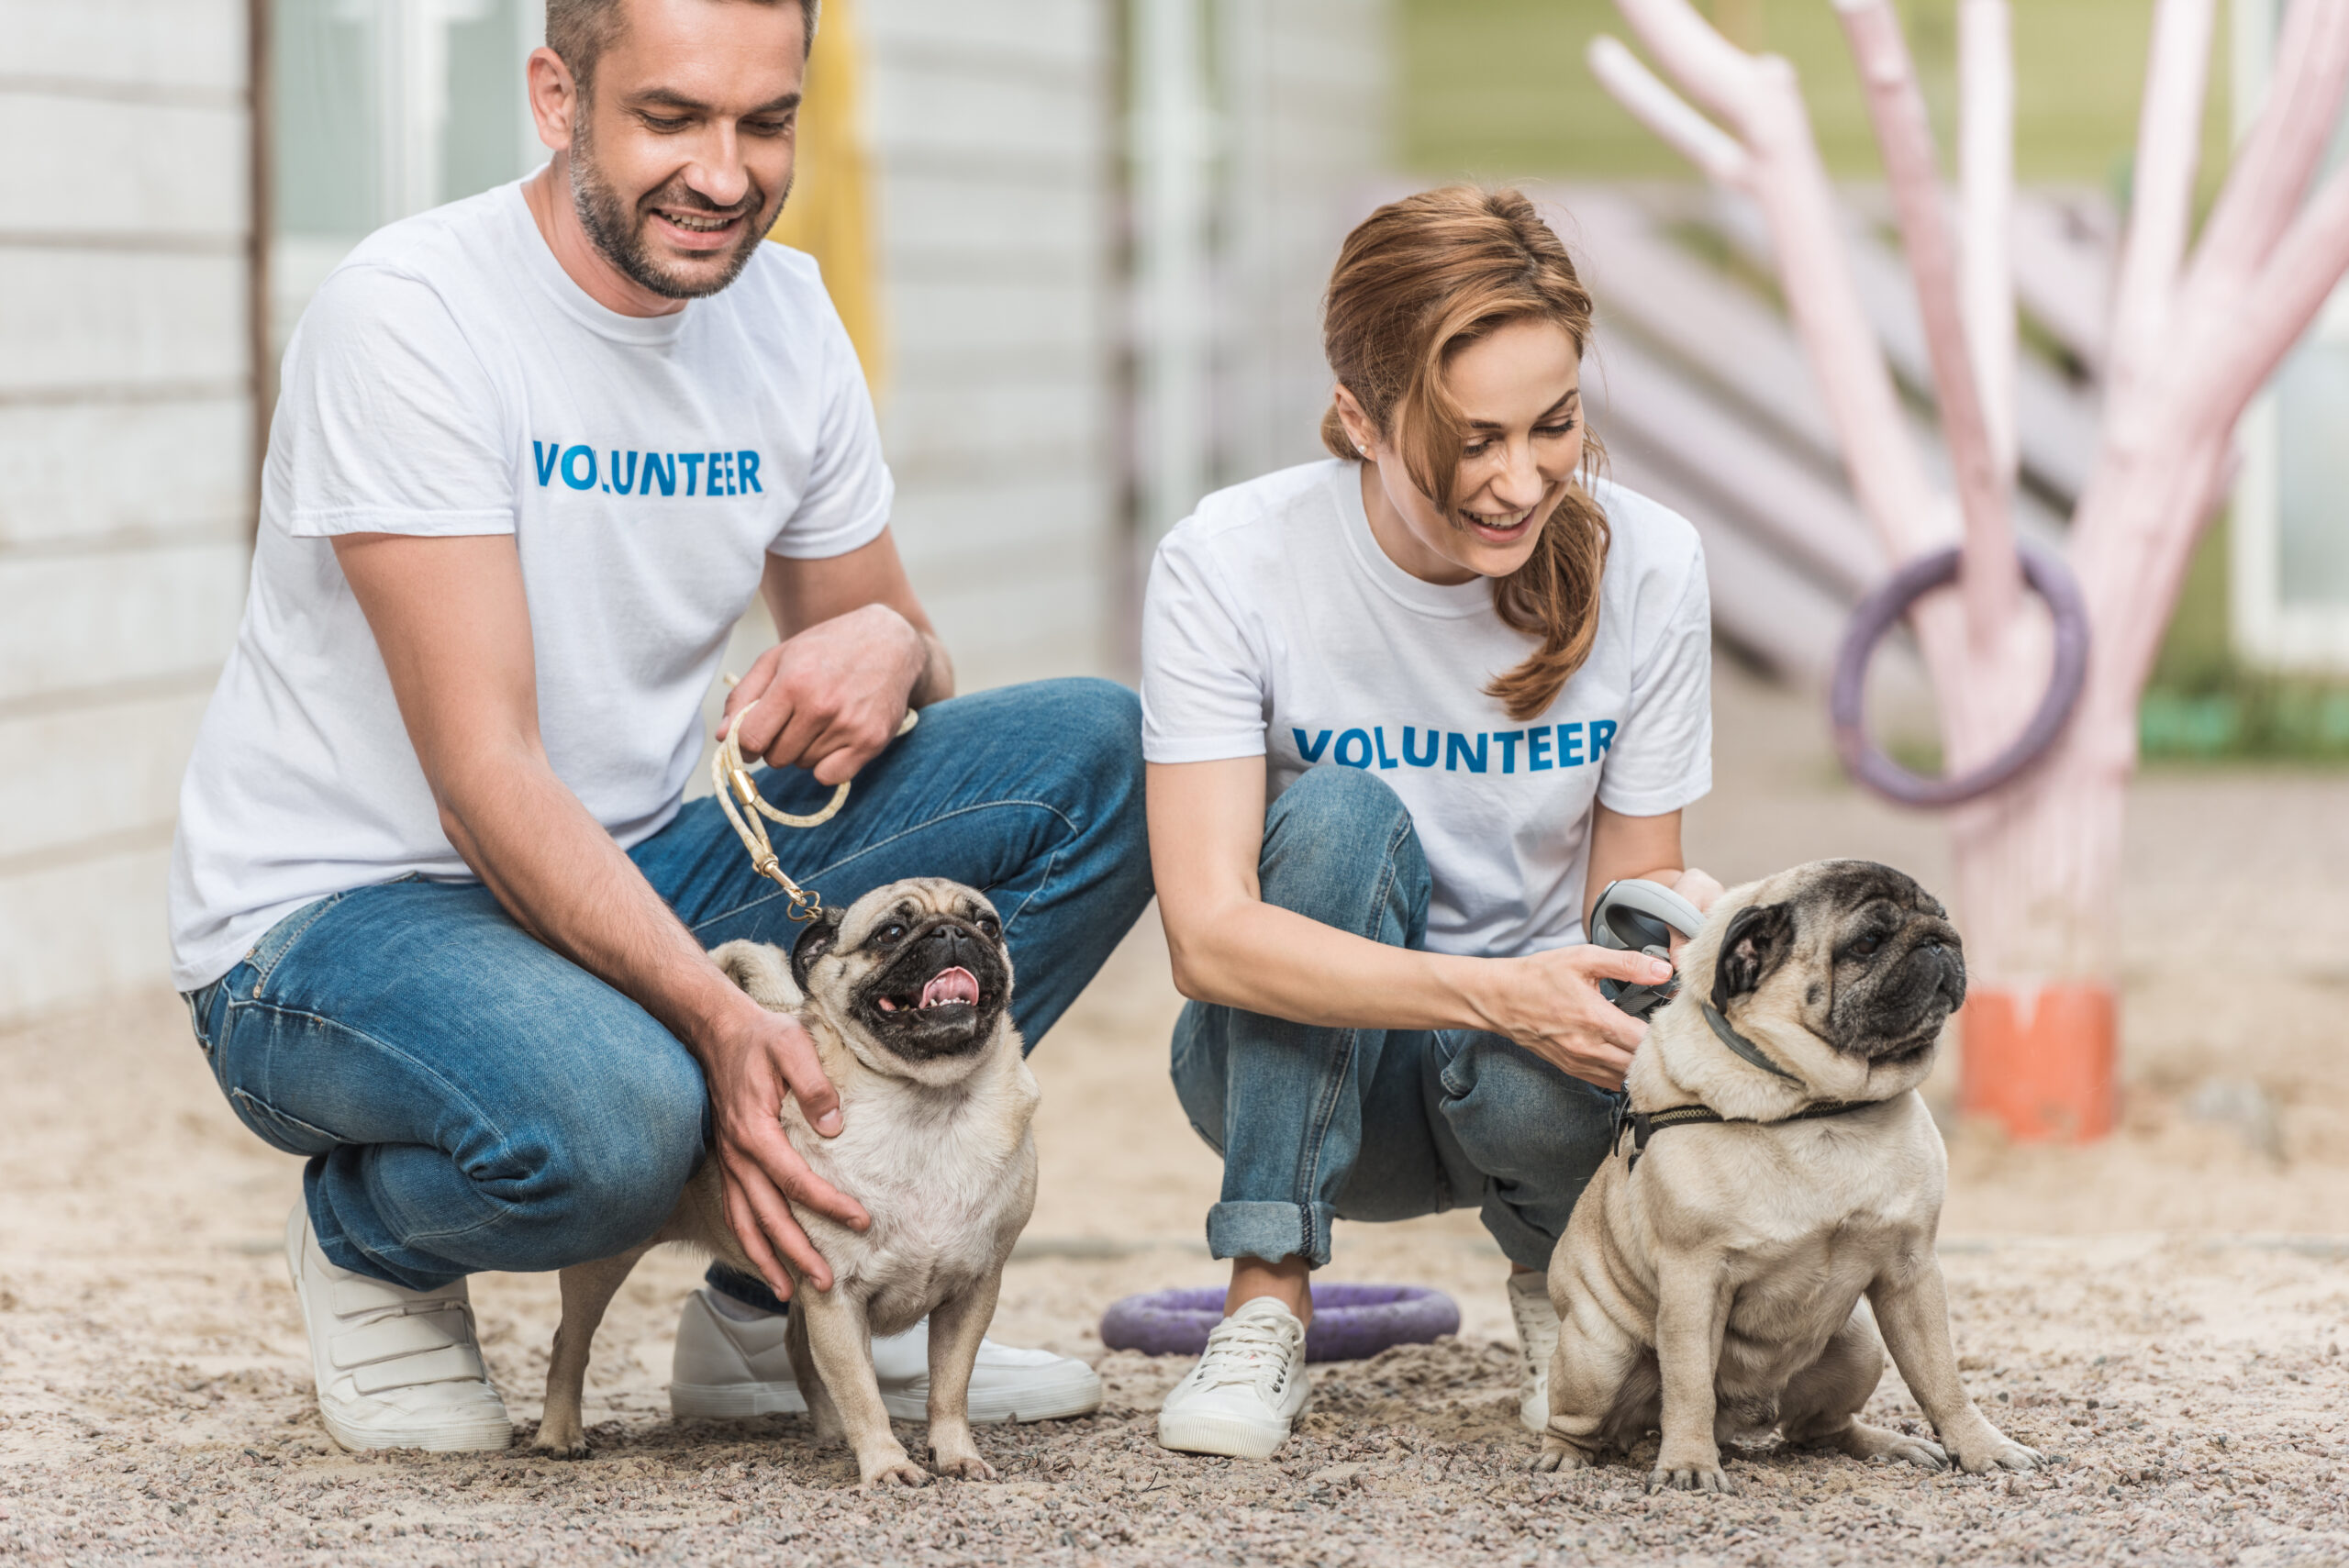 Man and woman volunteer at a pet shelter getting ready to take 2 pugs for a walk